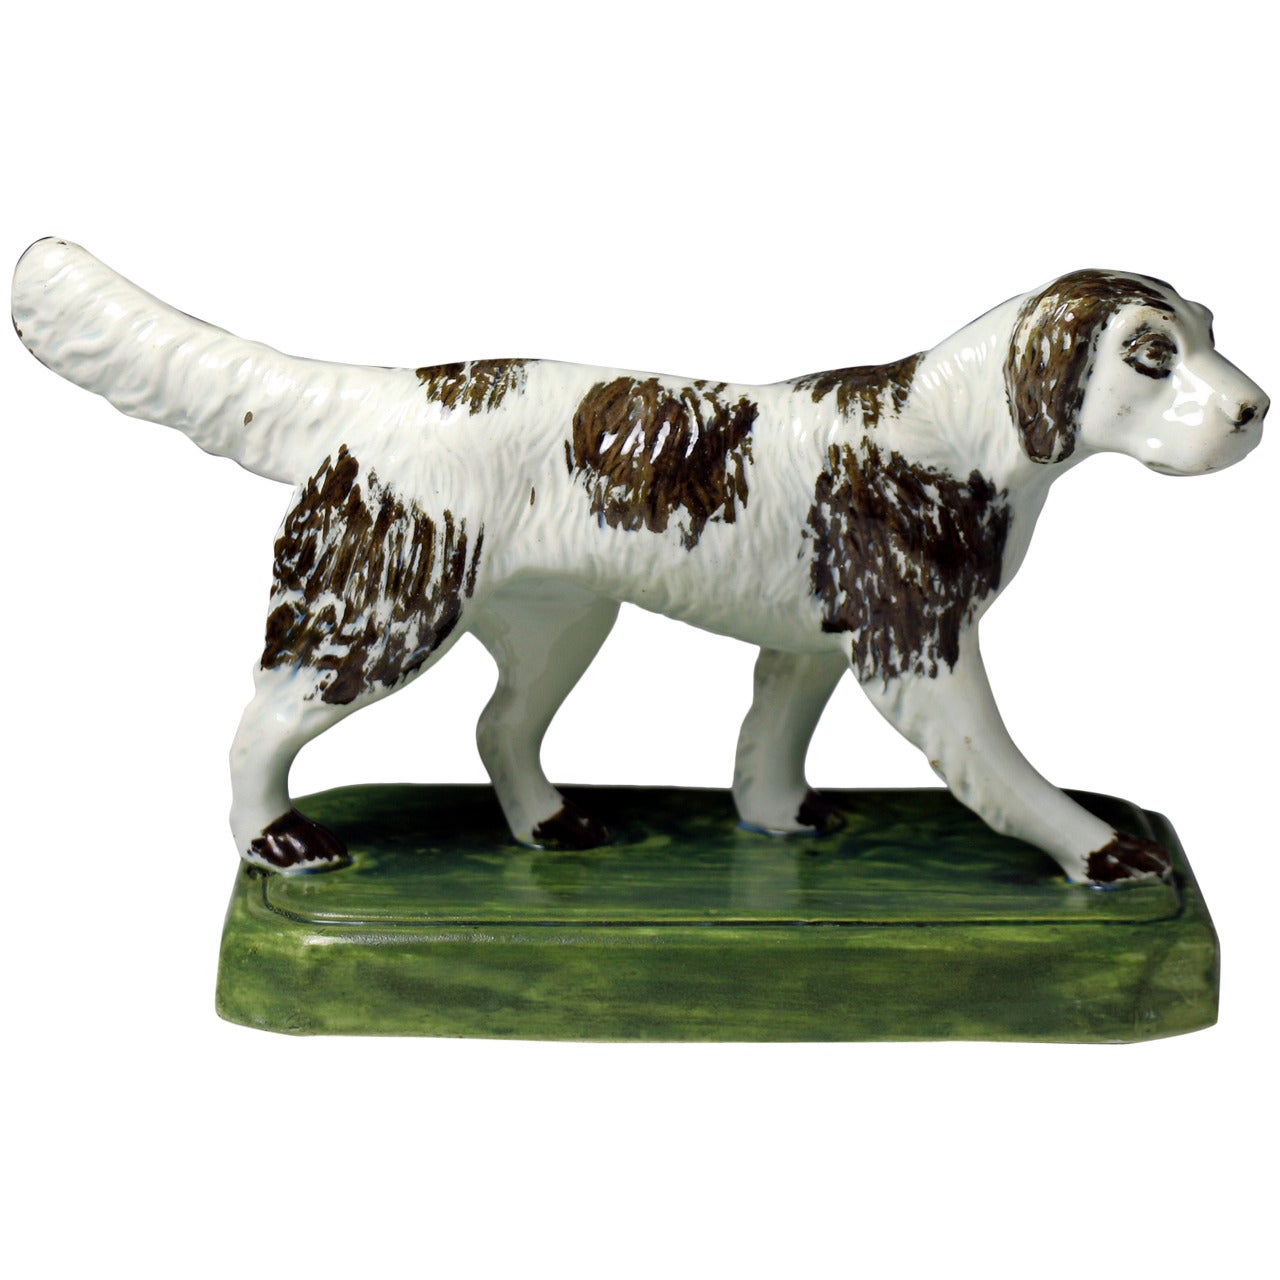 Antique pottery figure of a setter dog standing on a base